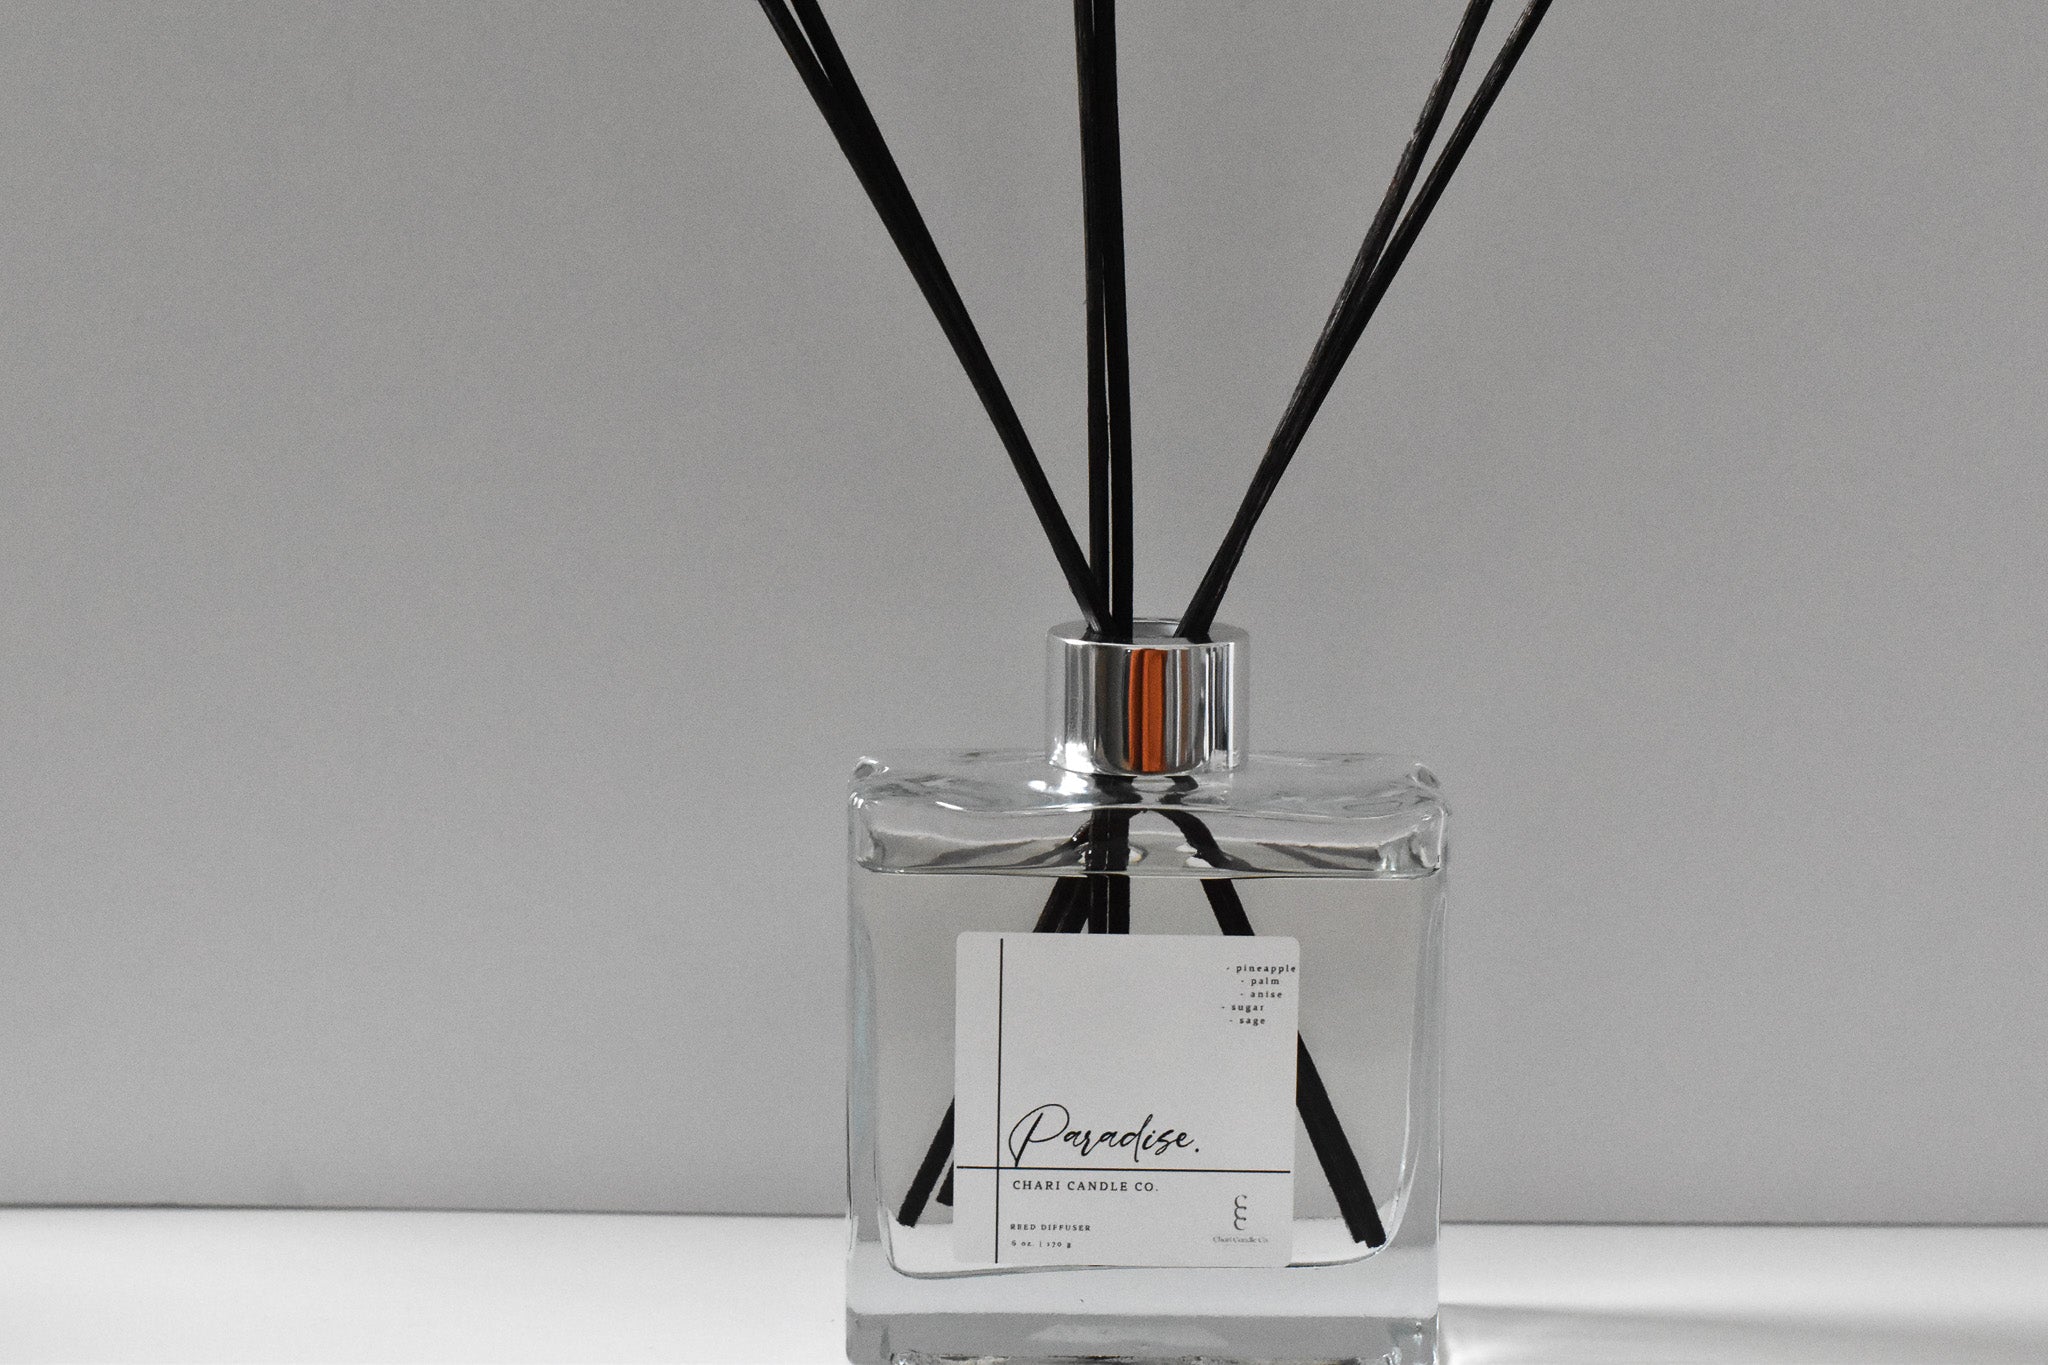 Cashmere Kiss Signature Reed Diffuser in Racine, WI